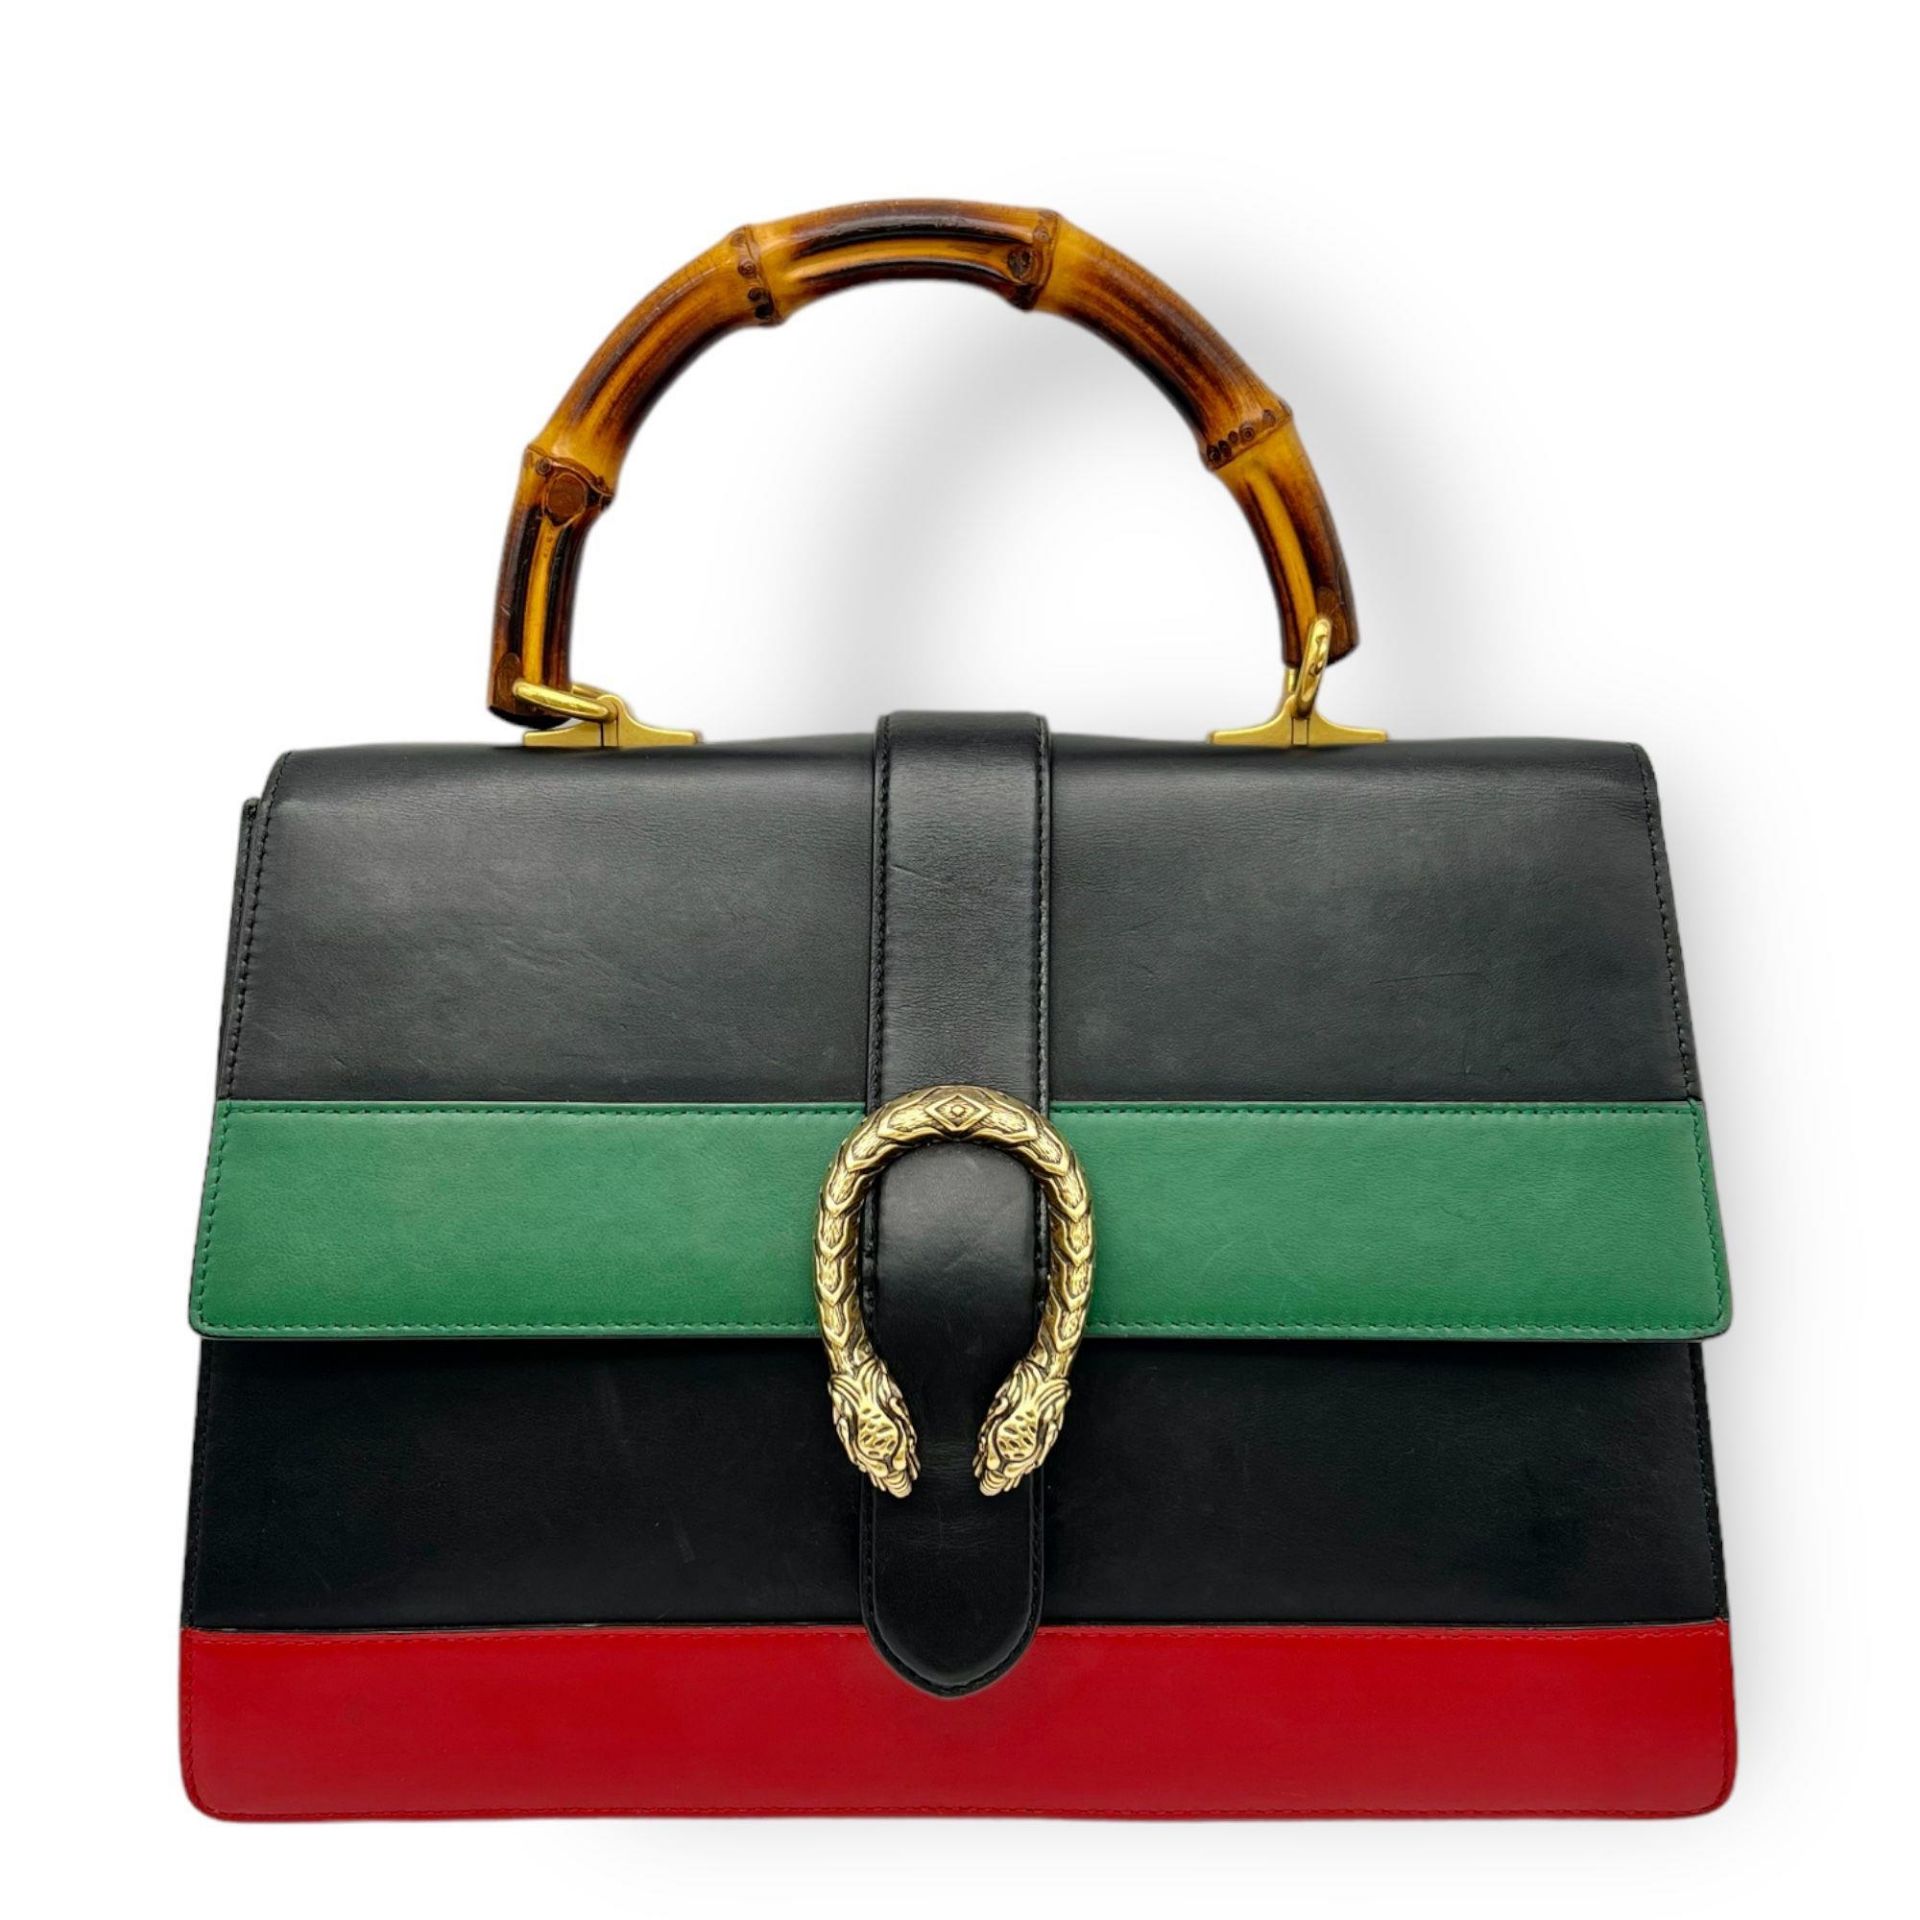 A Gucci Dionysus Bamboo Multi-Colour Leather Handbag with Dust Cover. Red, green and black